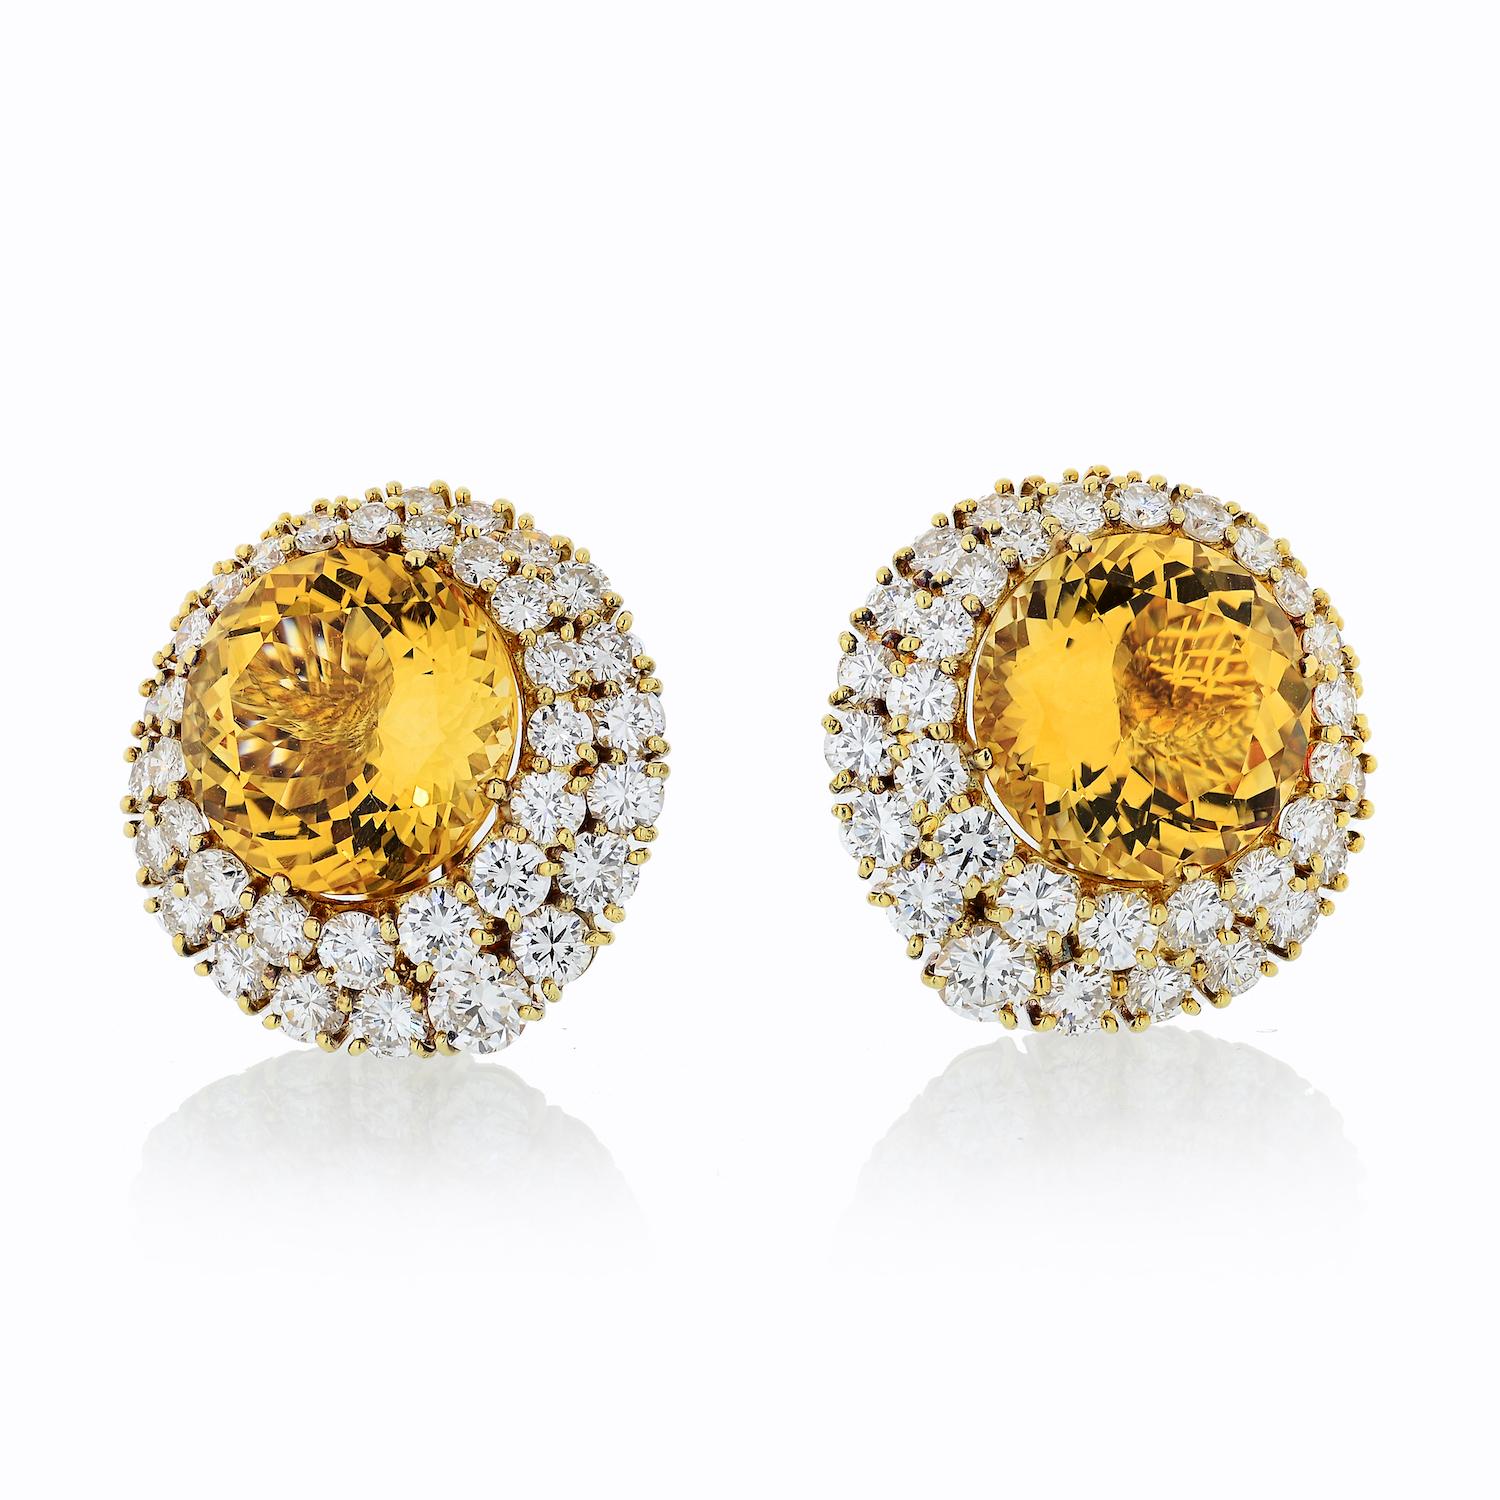 A pair of diamond and citrine stunning gold earrings crafted in 18K yellow gold by Tiffany & Co. Large and brilliant these ear clips were made in the 1980's and show no signs of wear. 
Hallmarked by Tiffany&Co.

W: 25mm
Citrine: 15mm
Clip-On.